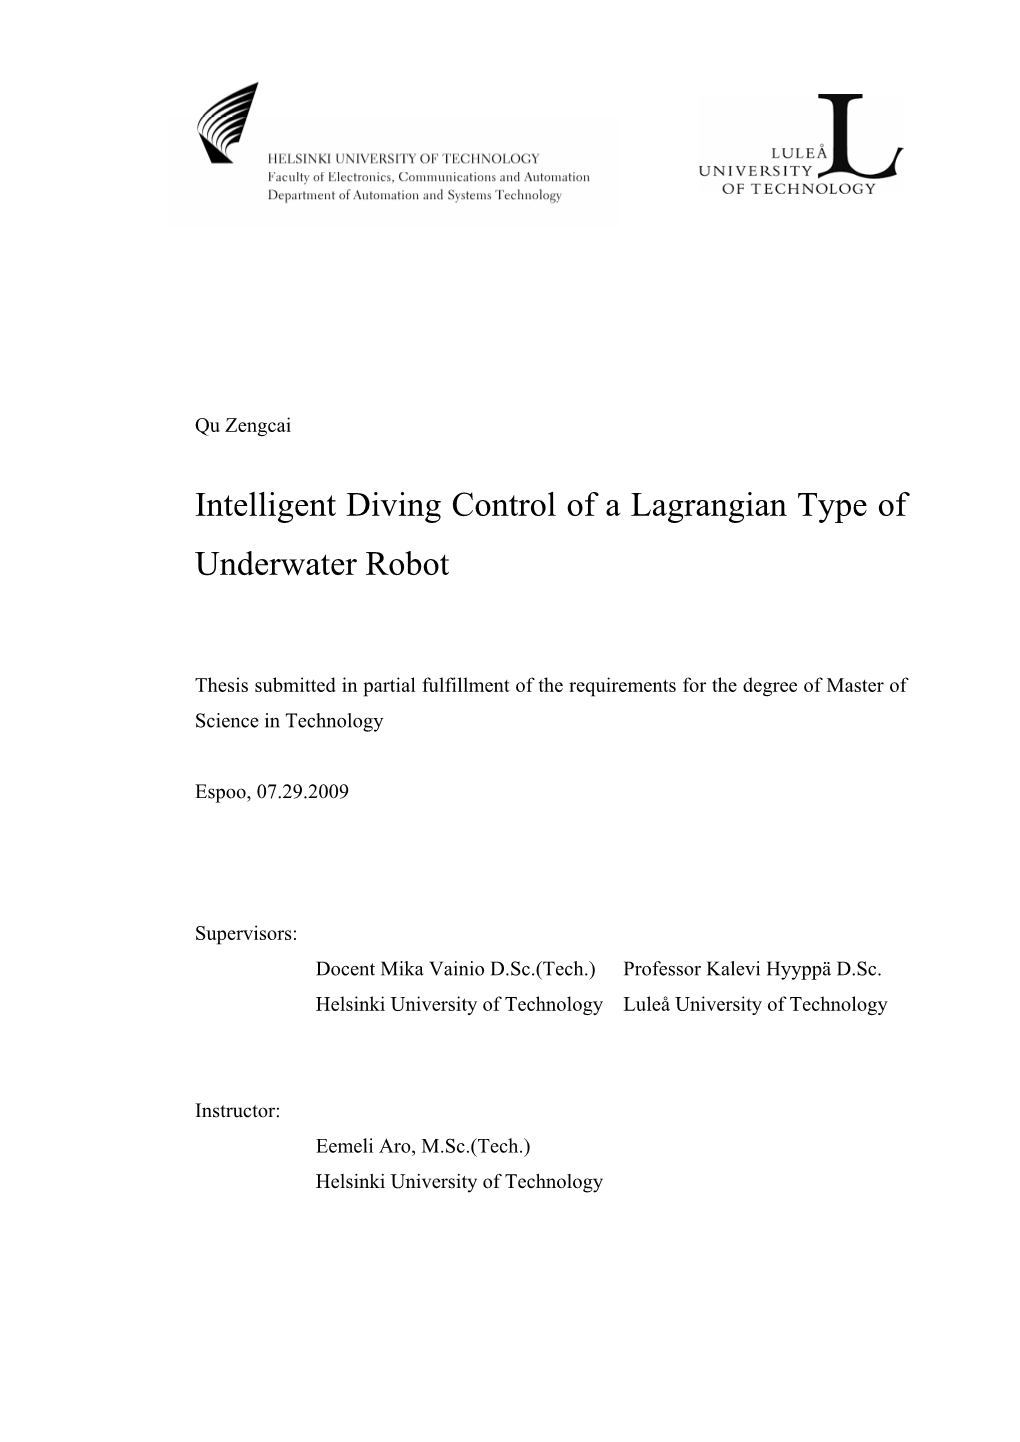 Intelligent Diving Control of a Lagrangian Type of Underwater Robot